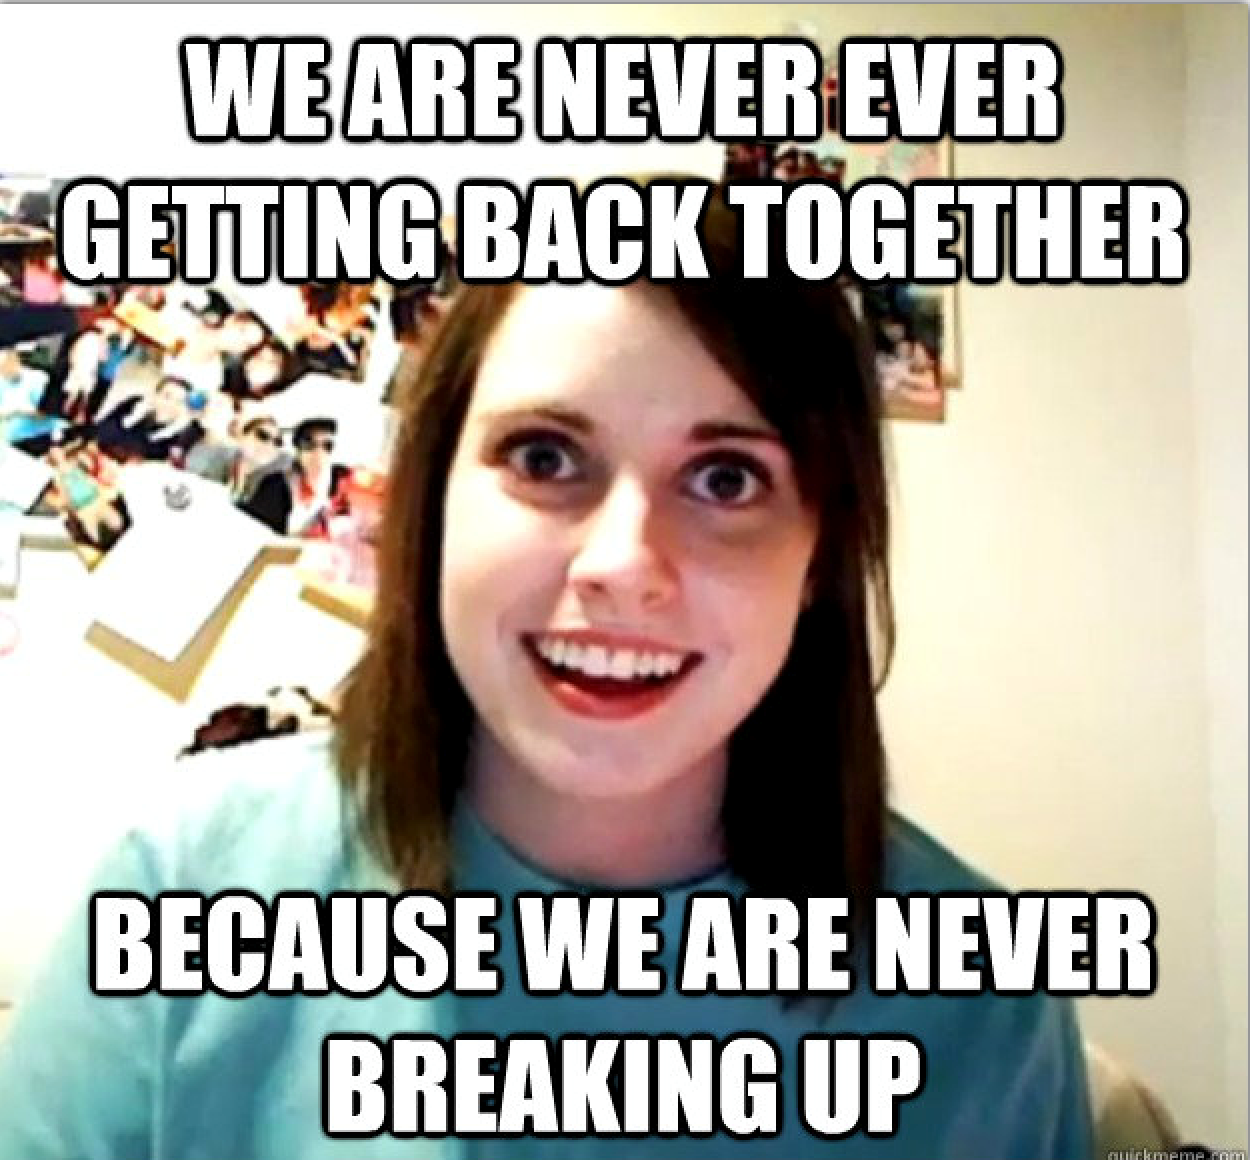 Get back together. Together because Мем. No girlfriend no problem Мем. We are never ever getting back together. Overly.